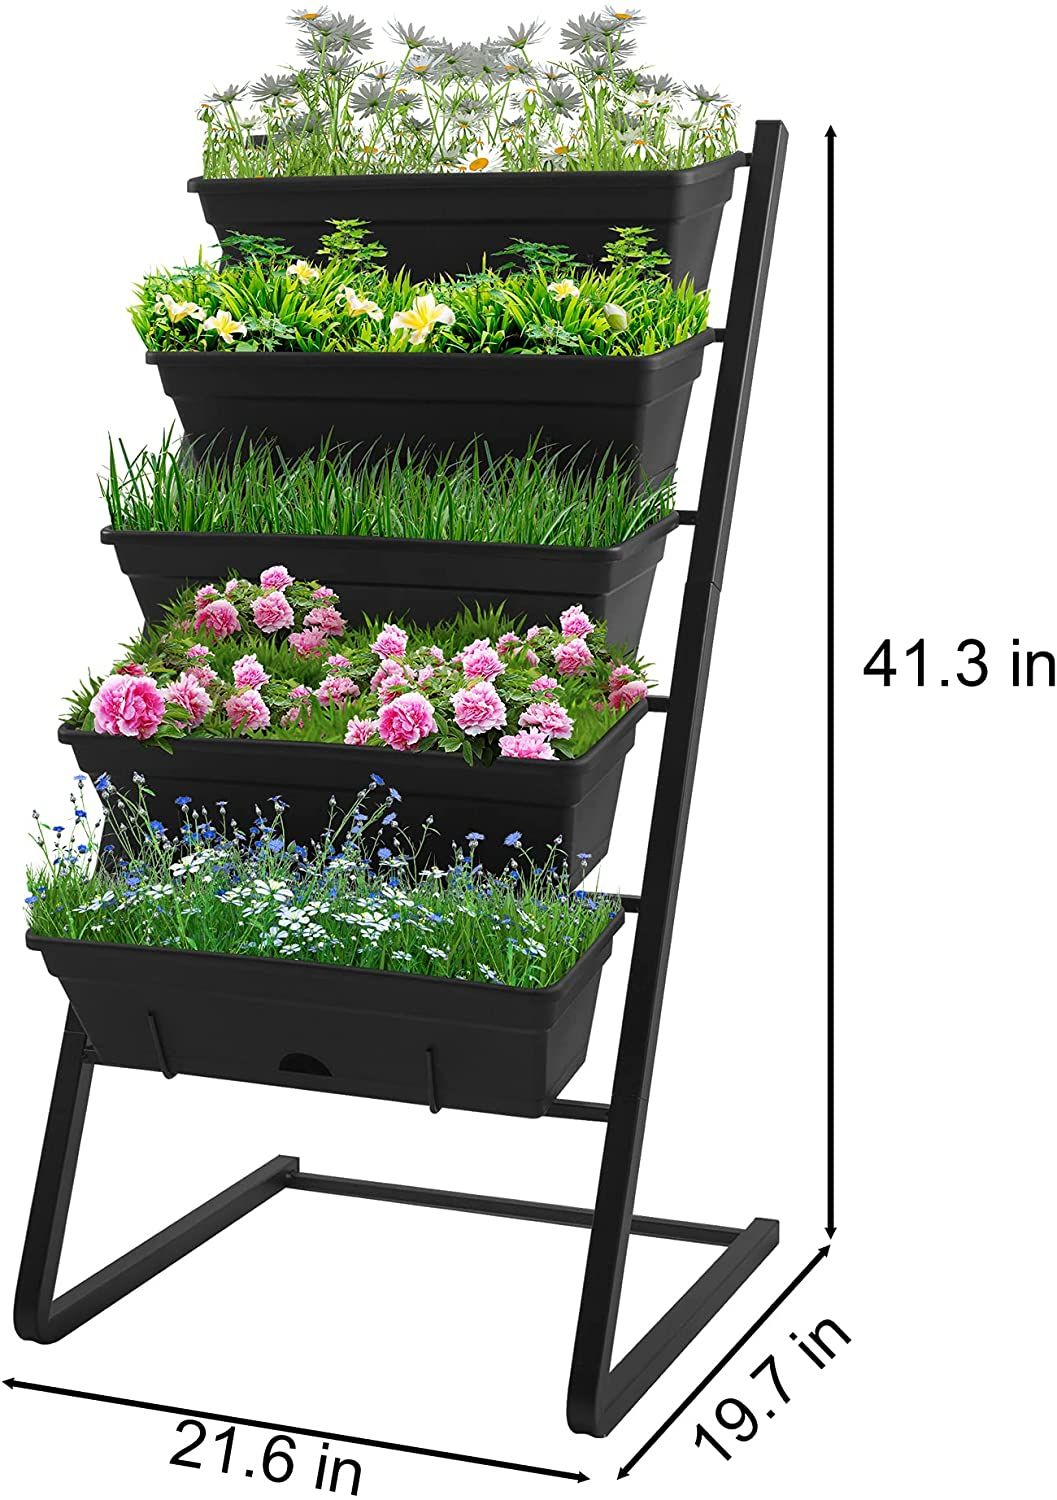 Raised Garden Bed, Multi Tier Plant Stand Flower Display Rack, Vertical  Garden Freestanding Elevated Planters With 5 Container Boxes, Cascading  Water Drainage, For Patio Balcony Indoor Outdoor – Walmart Throughout Plant Stands With Flower Box (View 7 of 15)